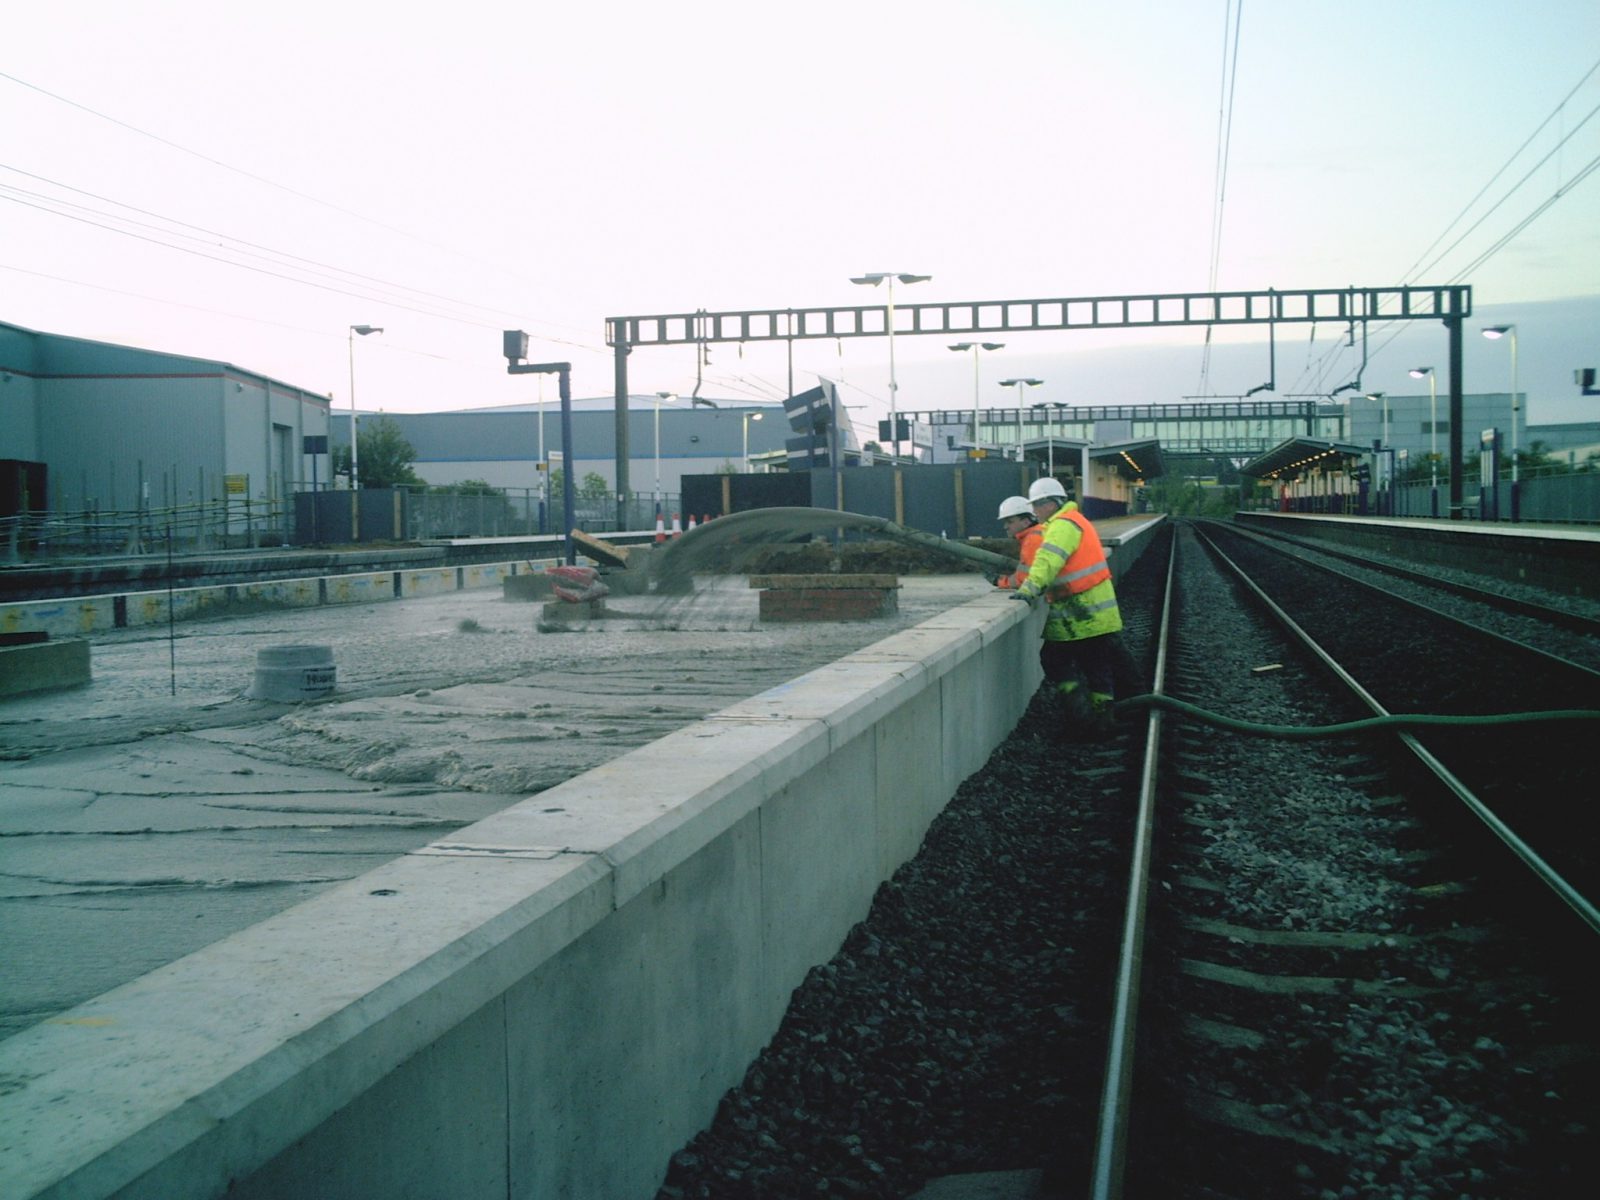 Propump engineering Foamed concrete specialists placing lightweight foamed concrete for rail upgrades and platform extensions